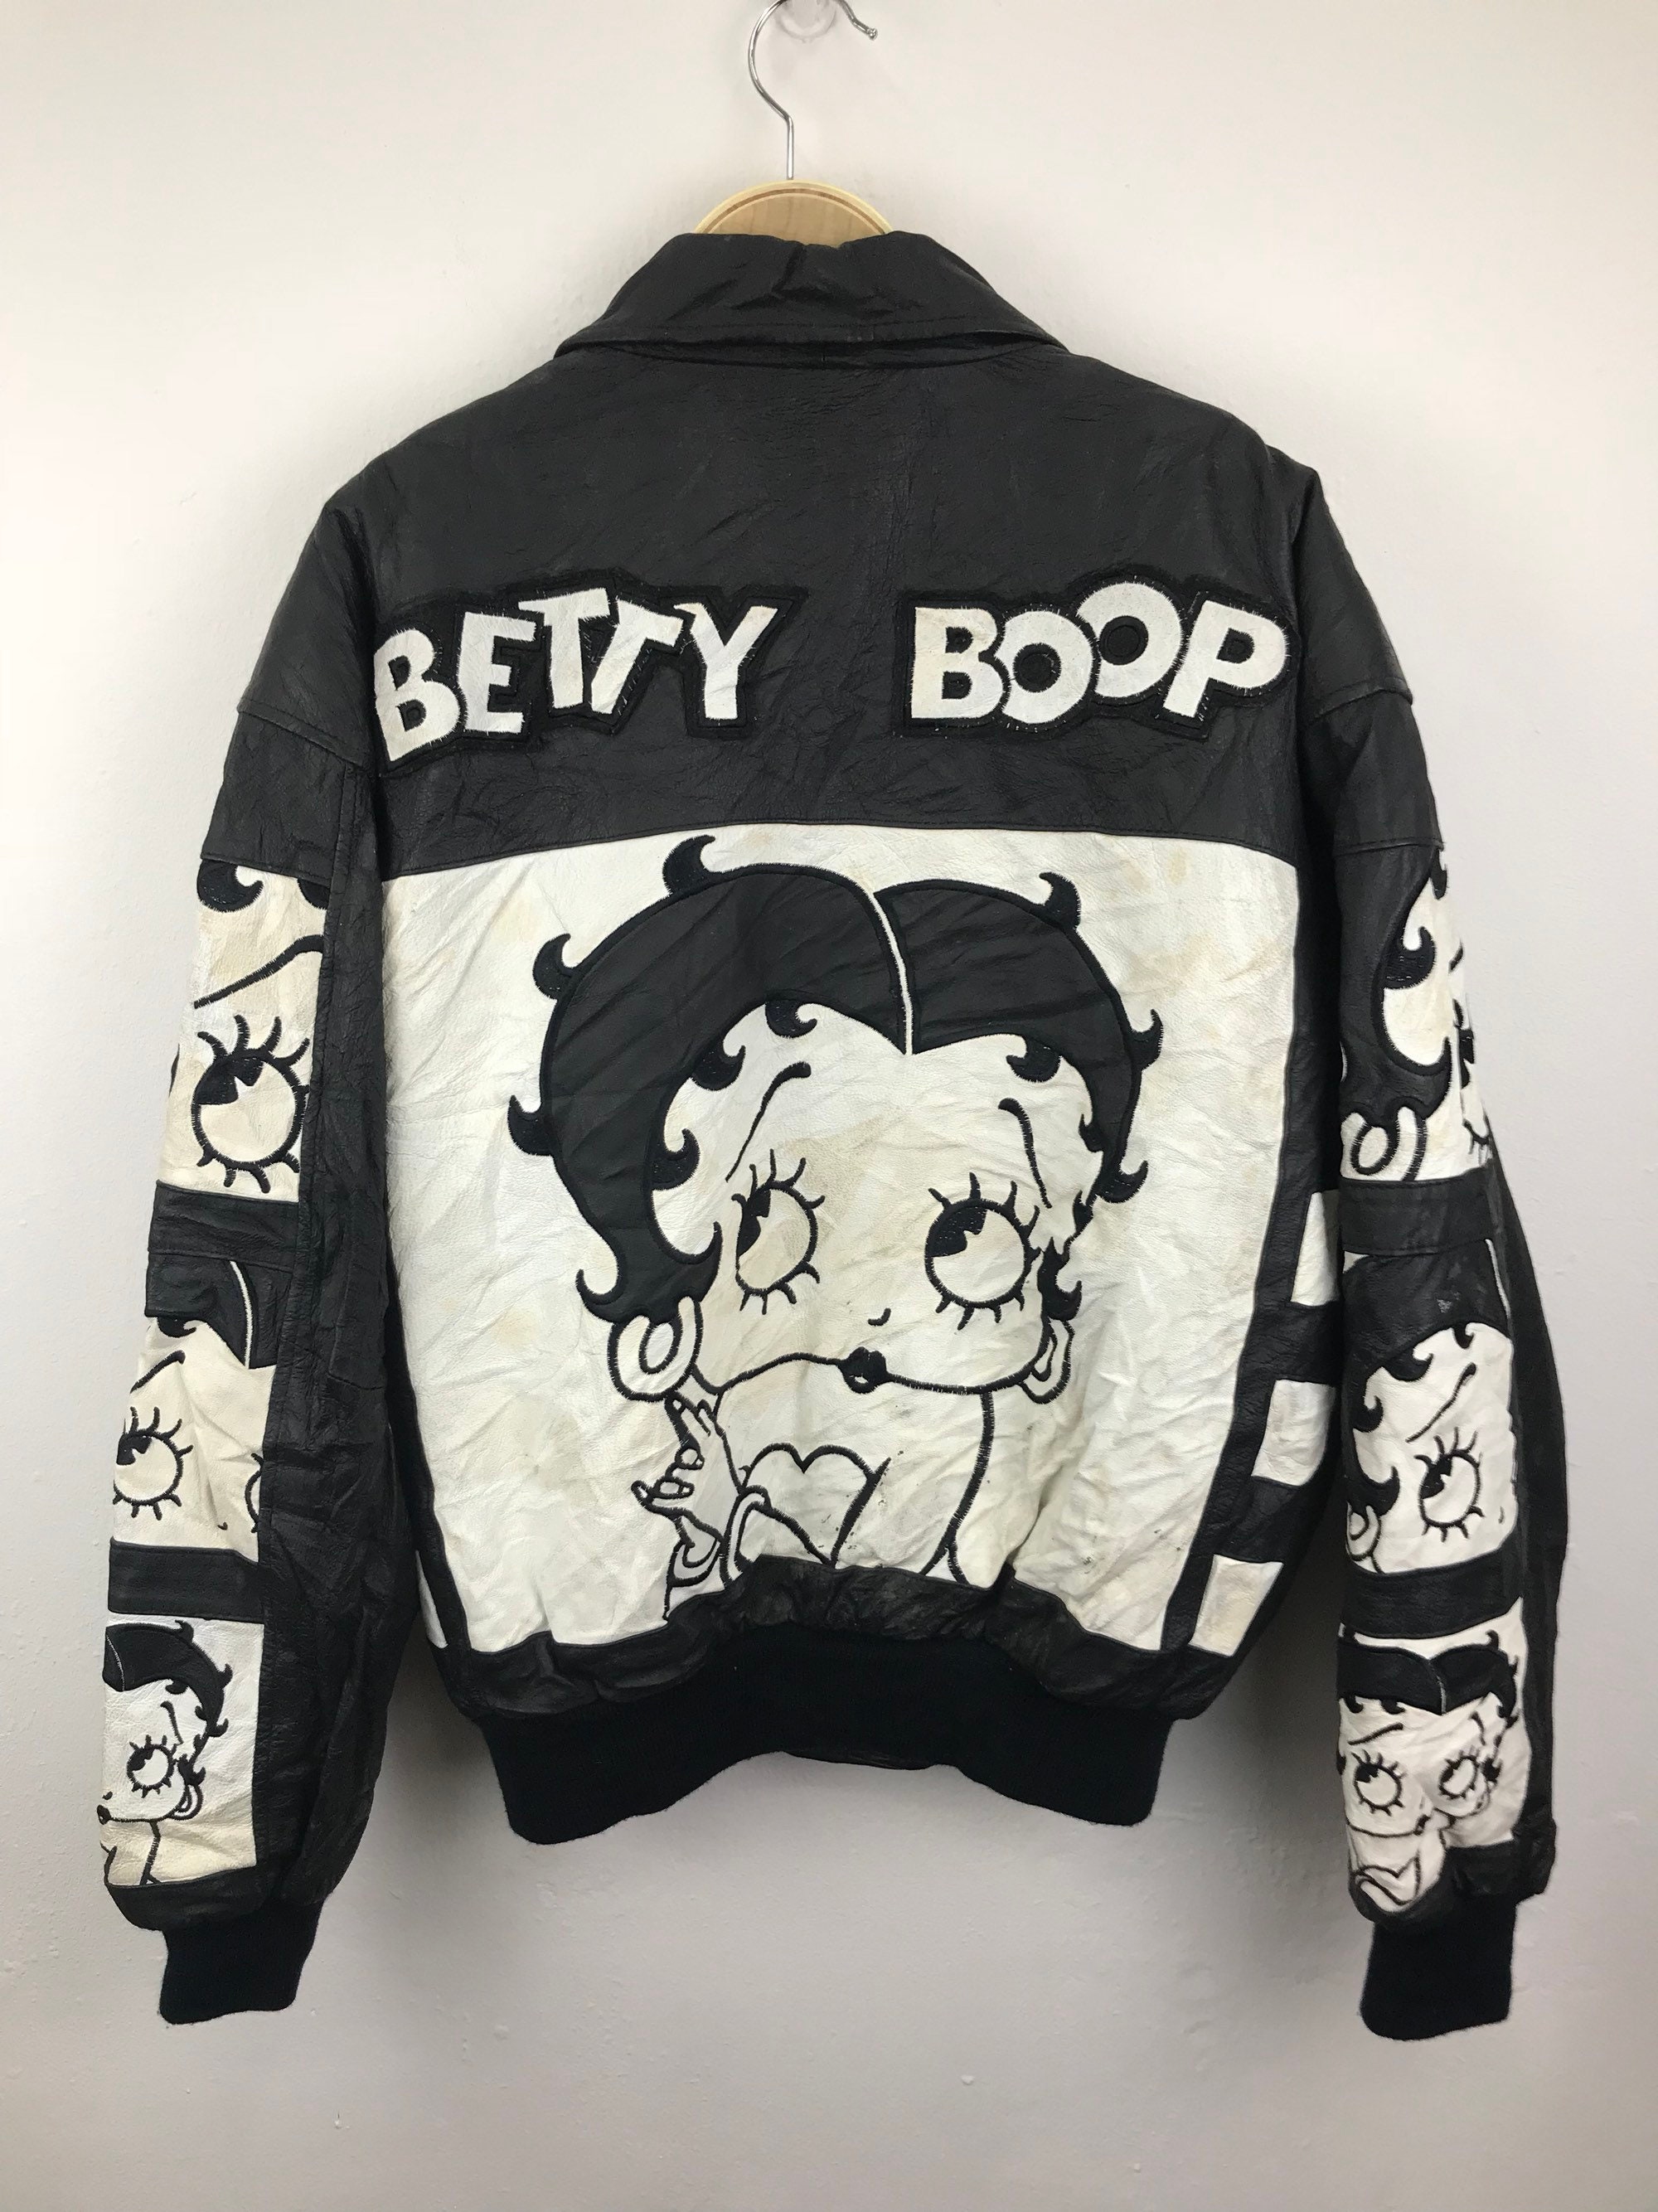 Betty Boop Montana Toons by Excelled Black Leather Jacket - Etsy